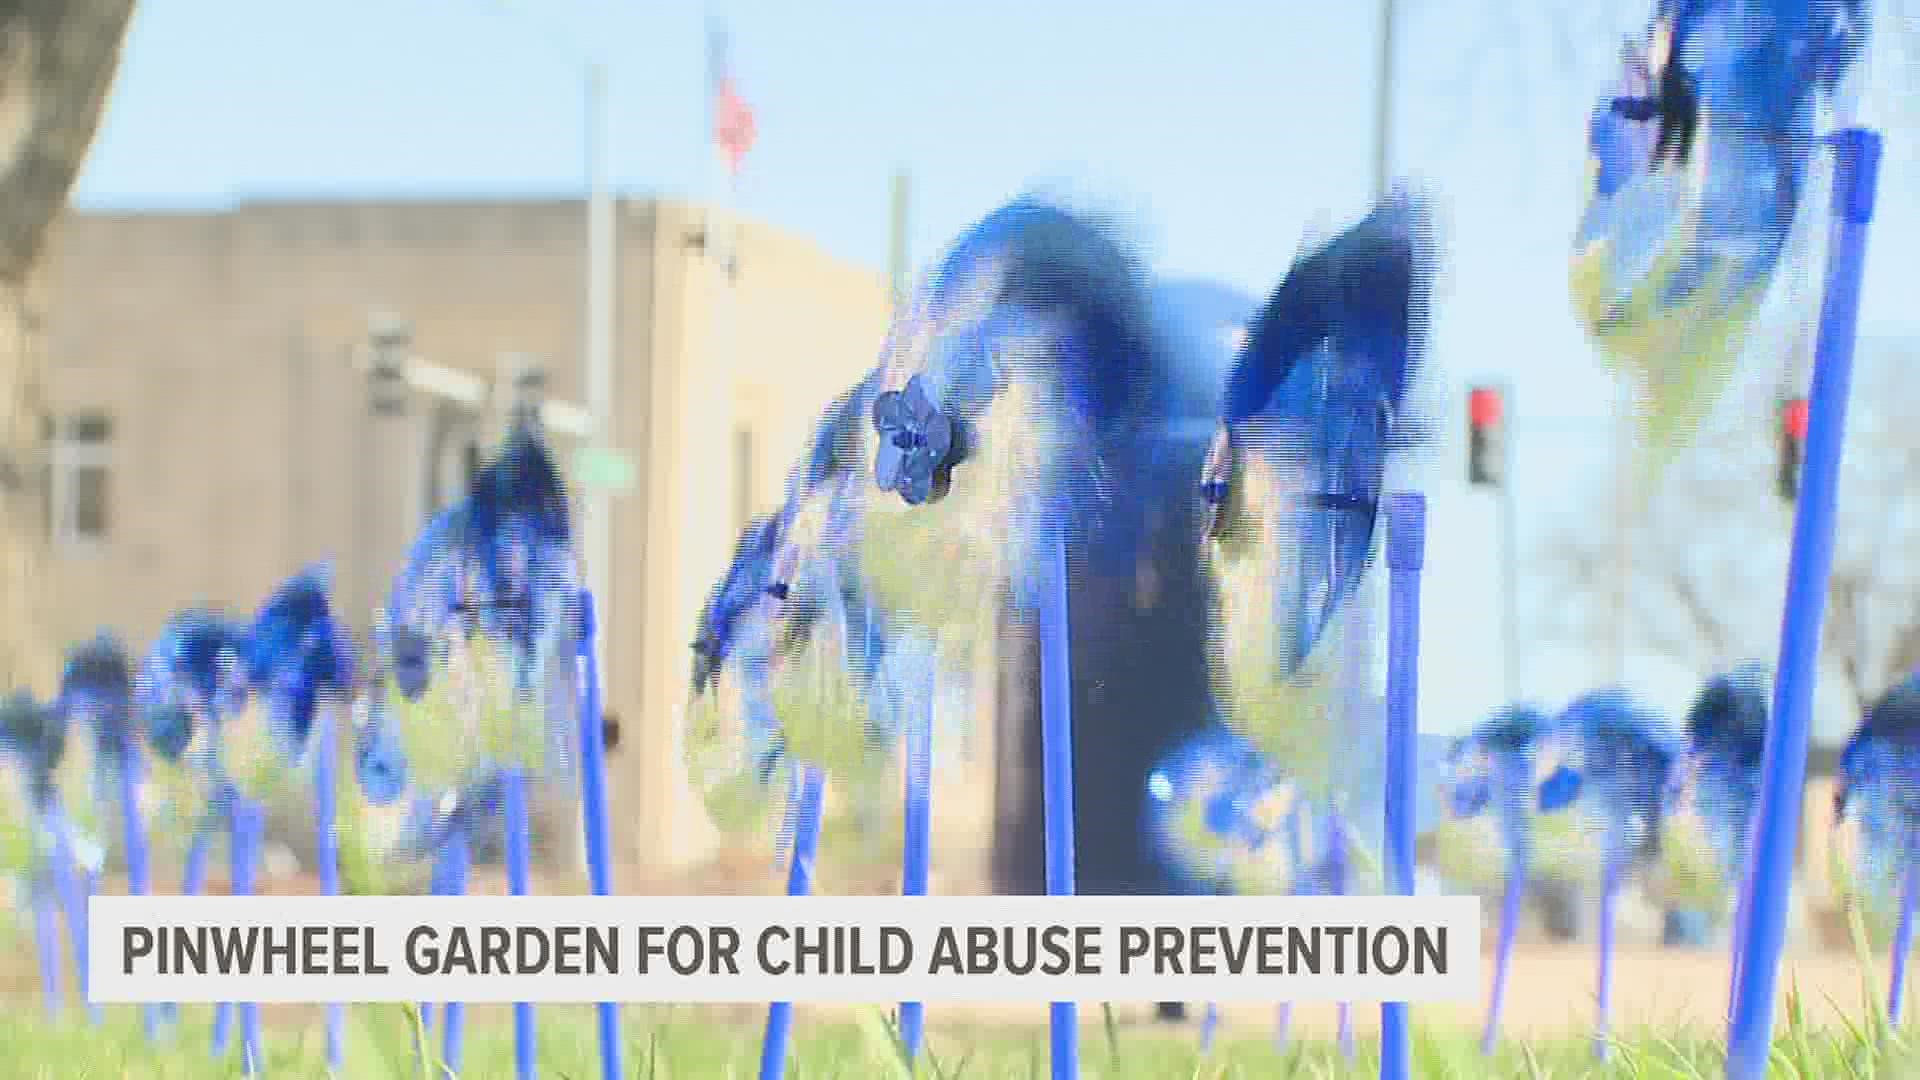 The blue displays are meant to symbolize the joy of happy children.